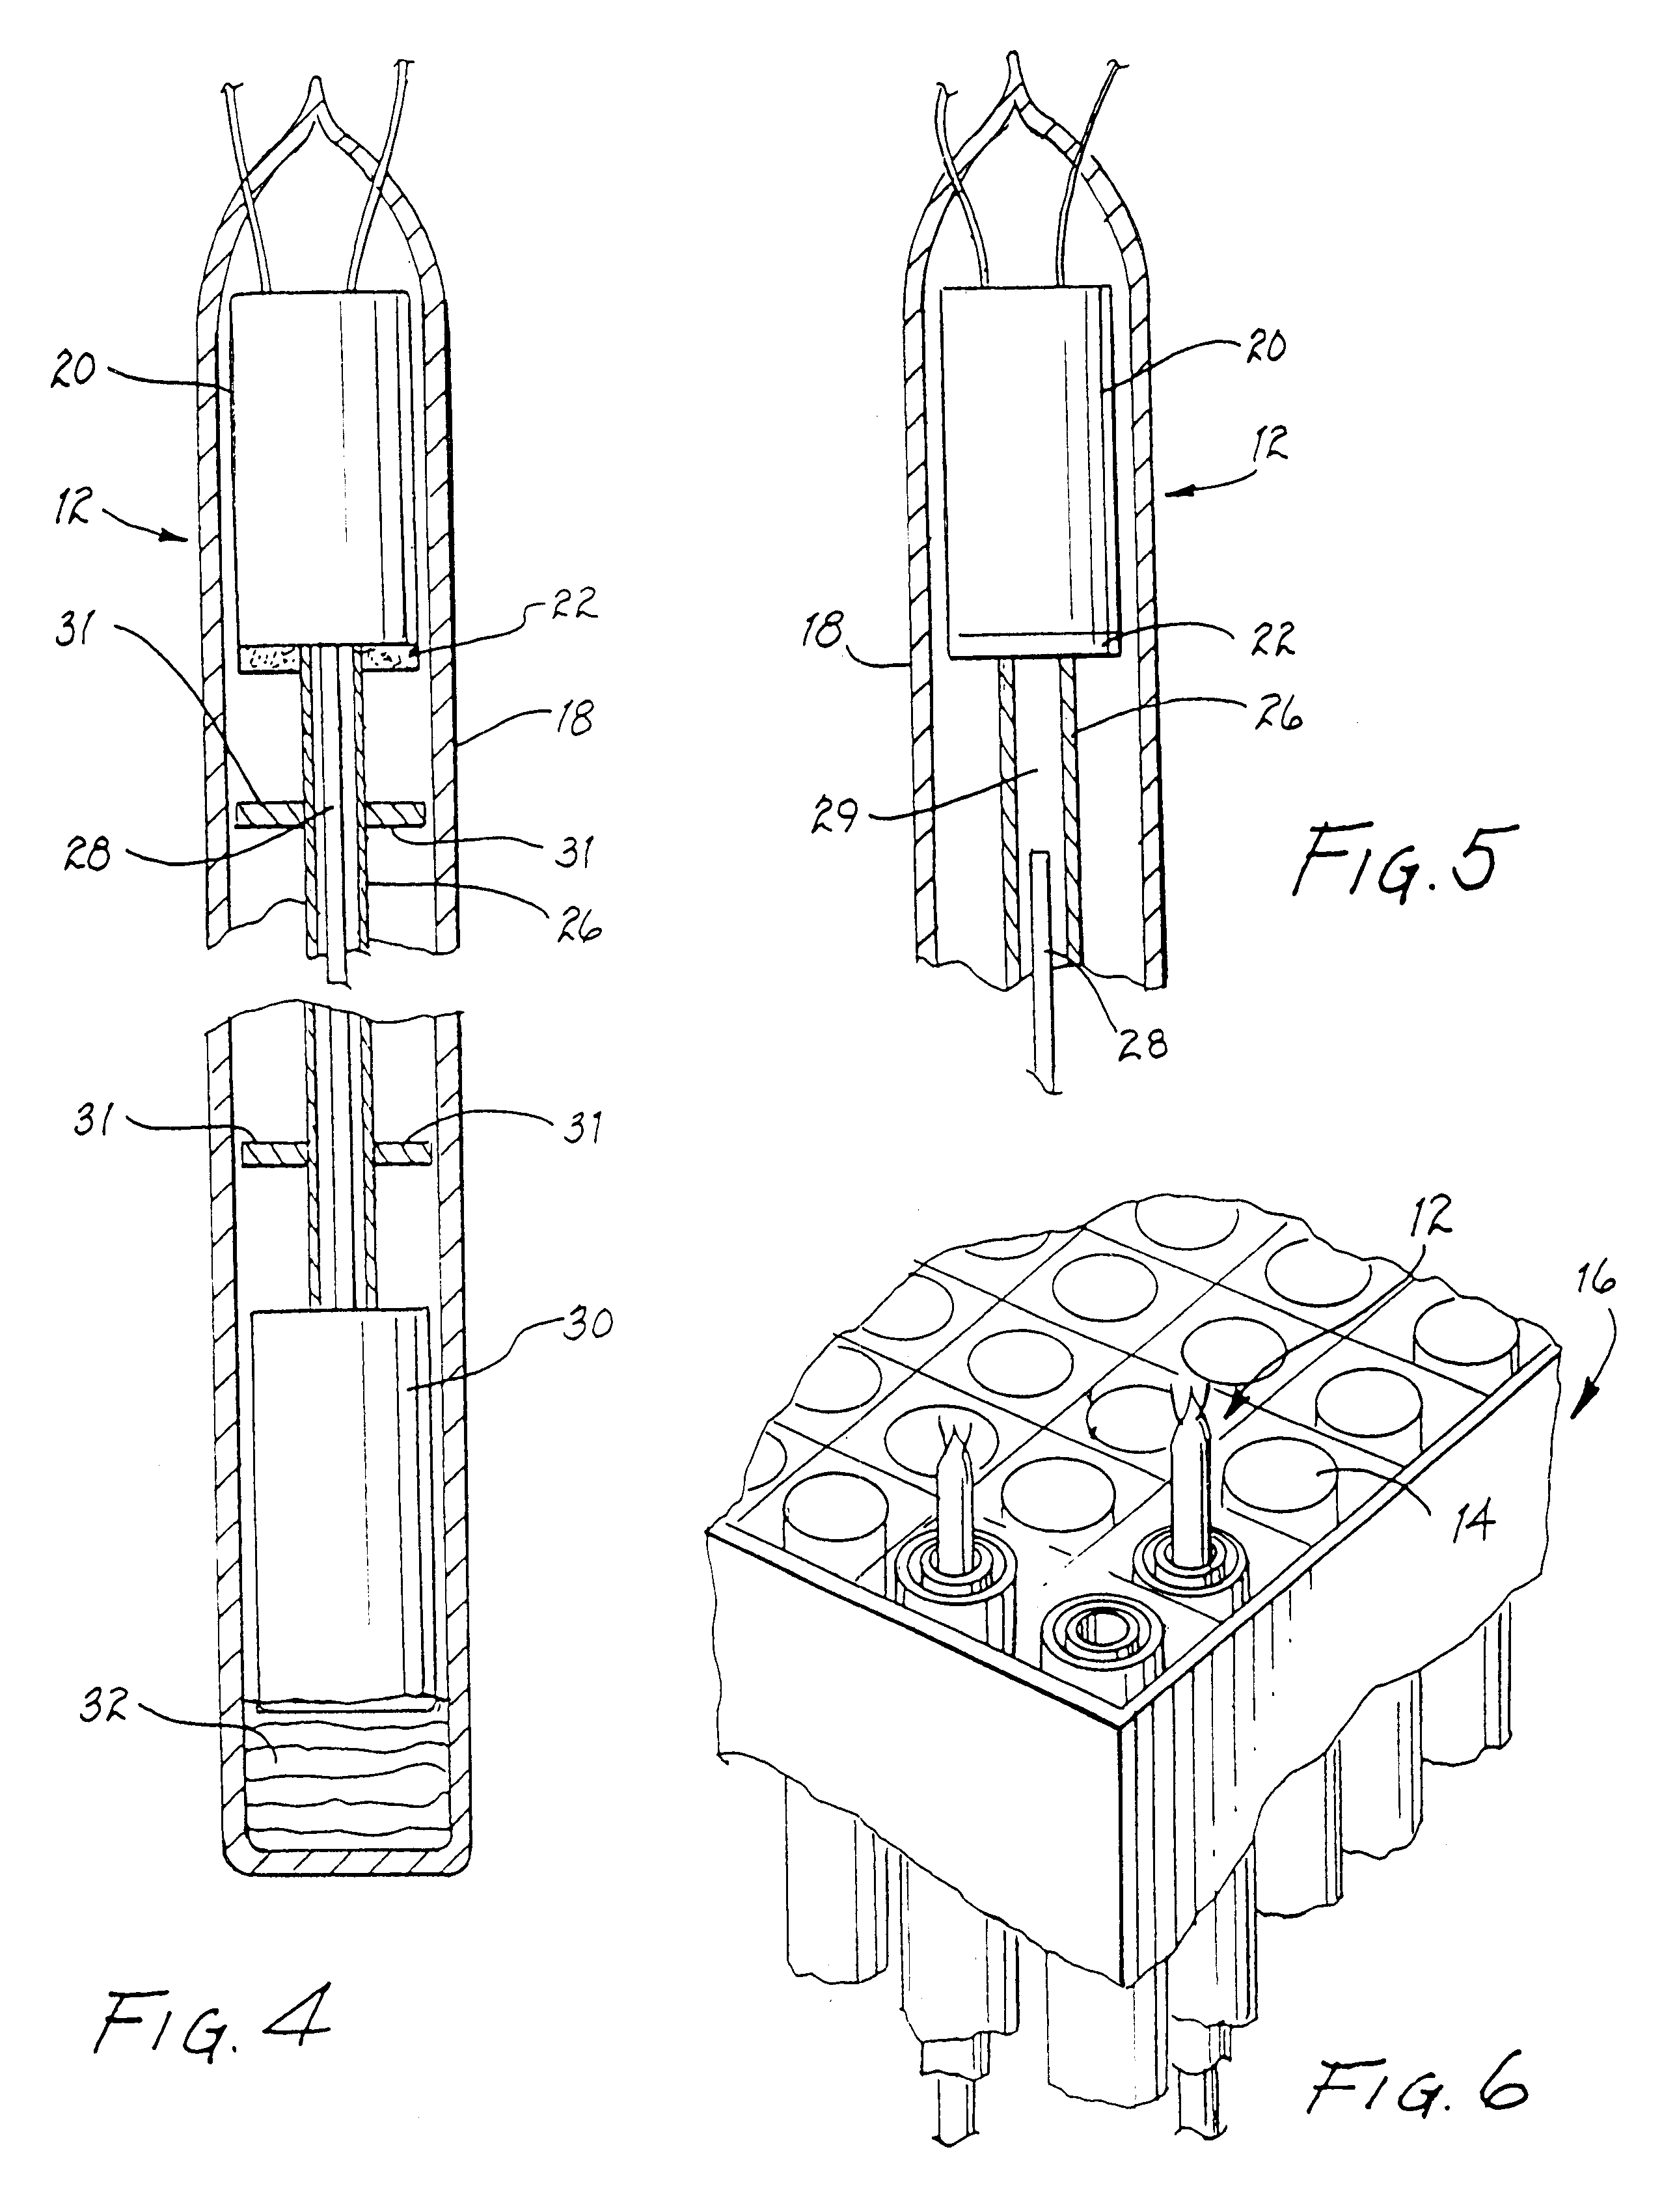 System and method for preserving stored foods